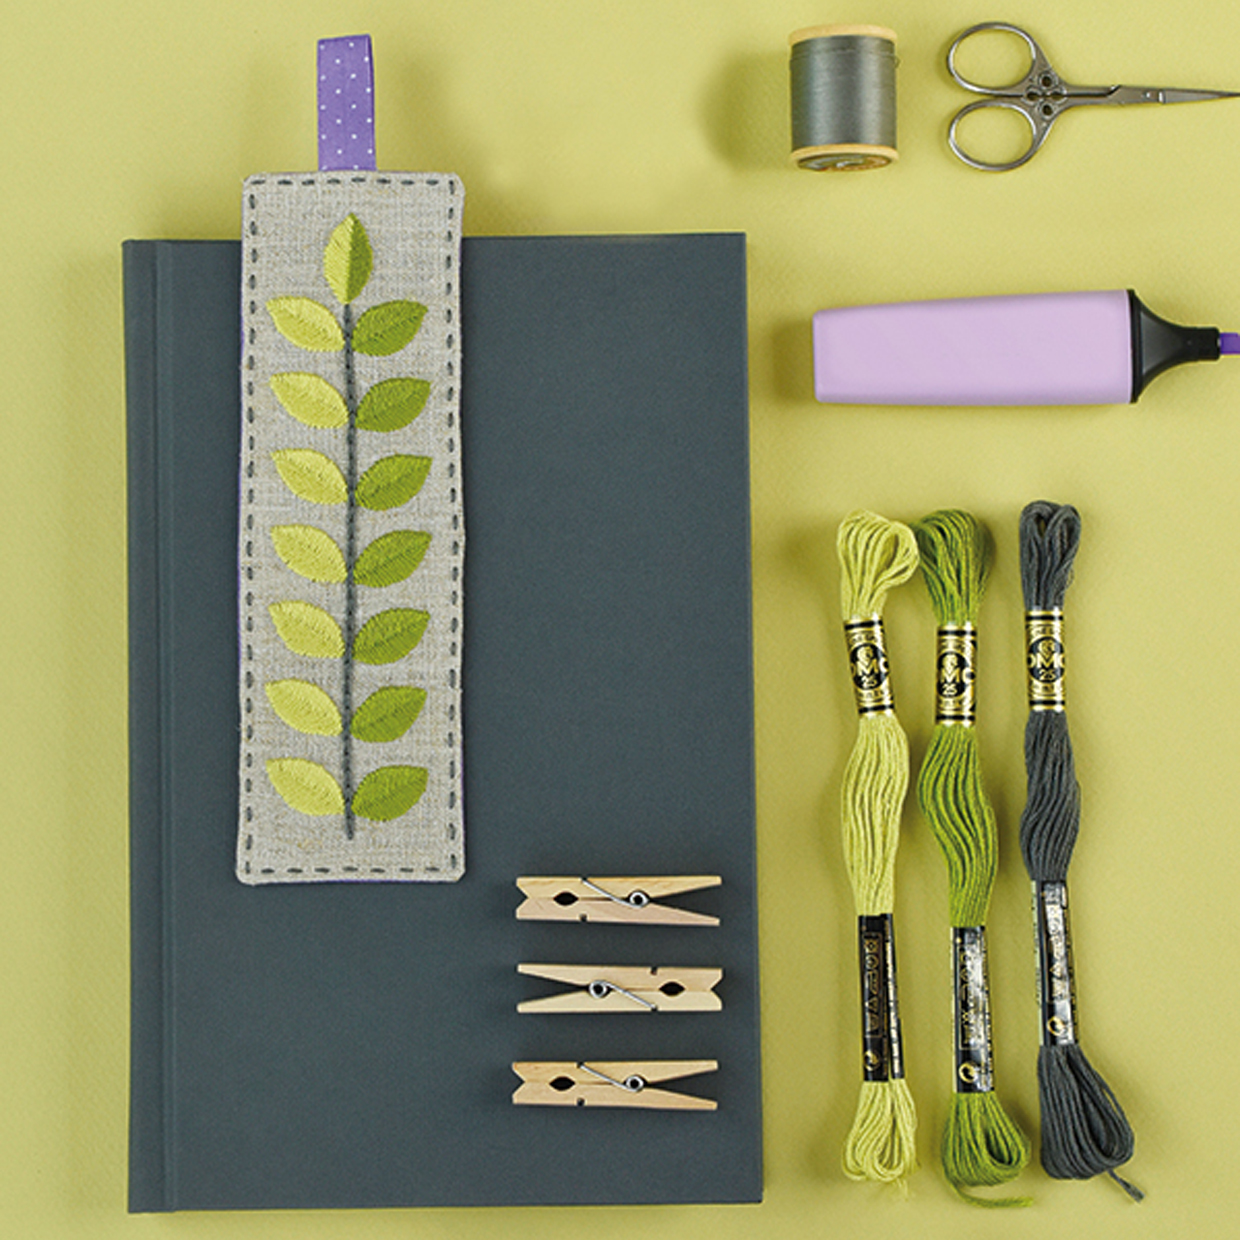 How to make a fabric bookmark